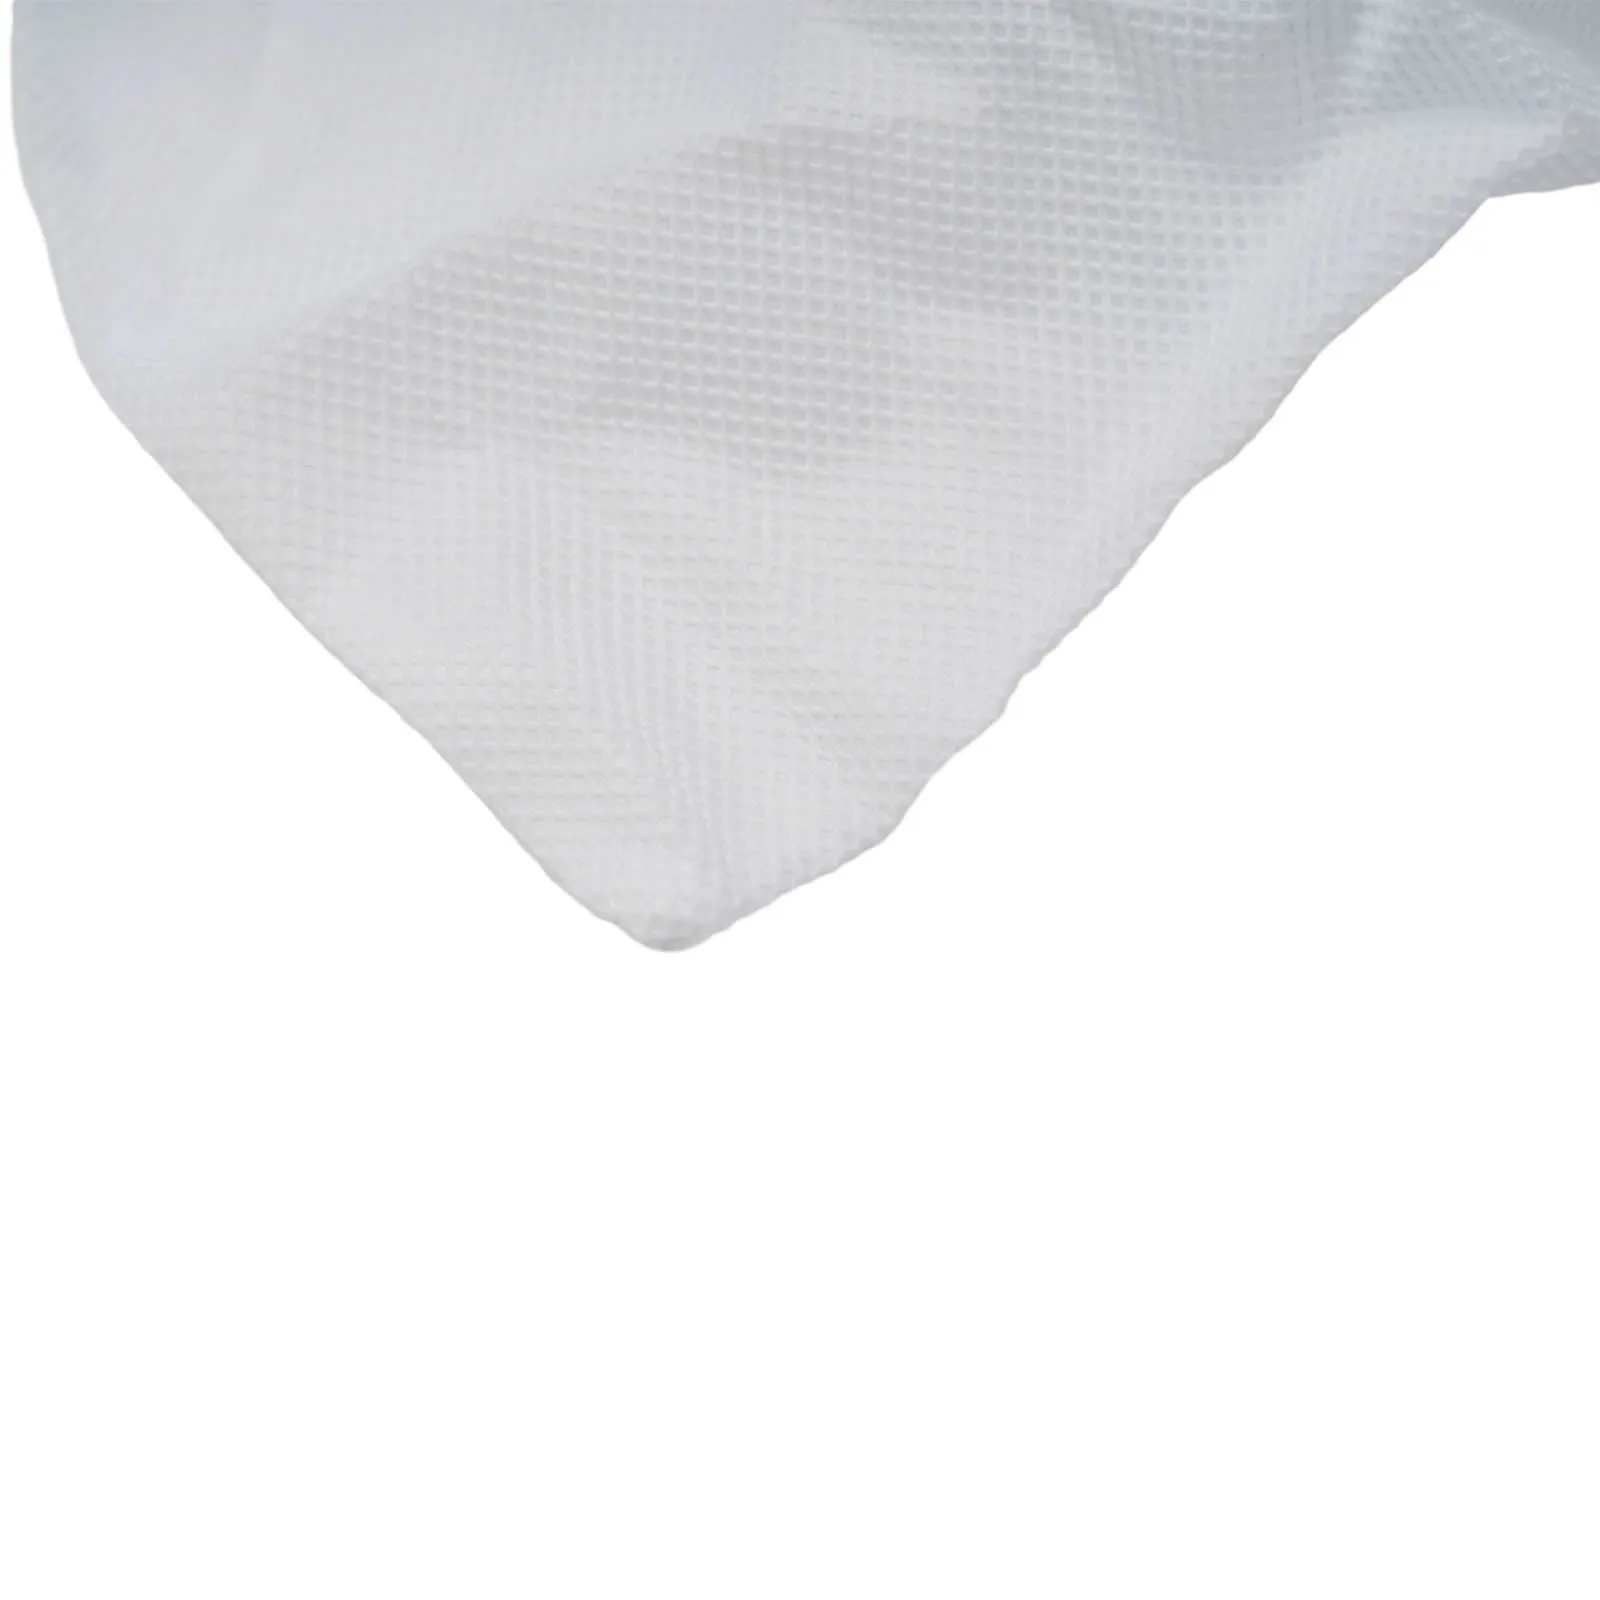 More Durable Practical Washable Brand New Washable Dust Bag Dust Bags 166084-9 For Makita CL100/106/180 DCL180 more durable practical washable washable dust bag dust bags for makita cl100 106 180 dcl180 dust bag economical